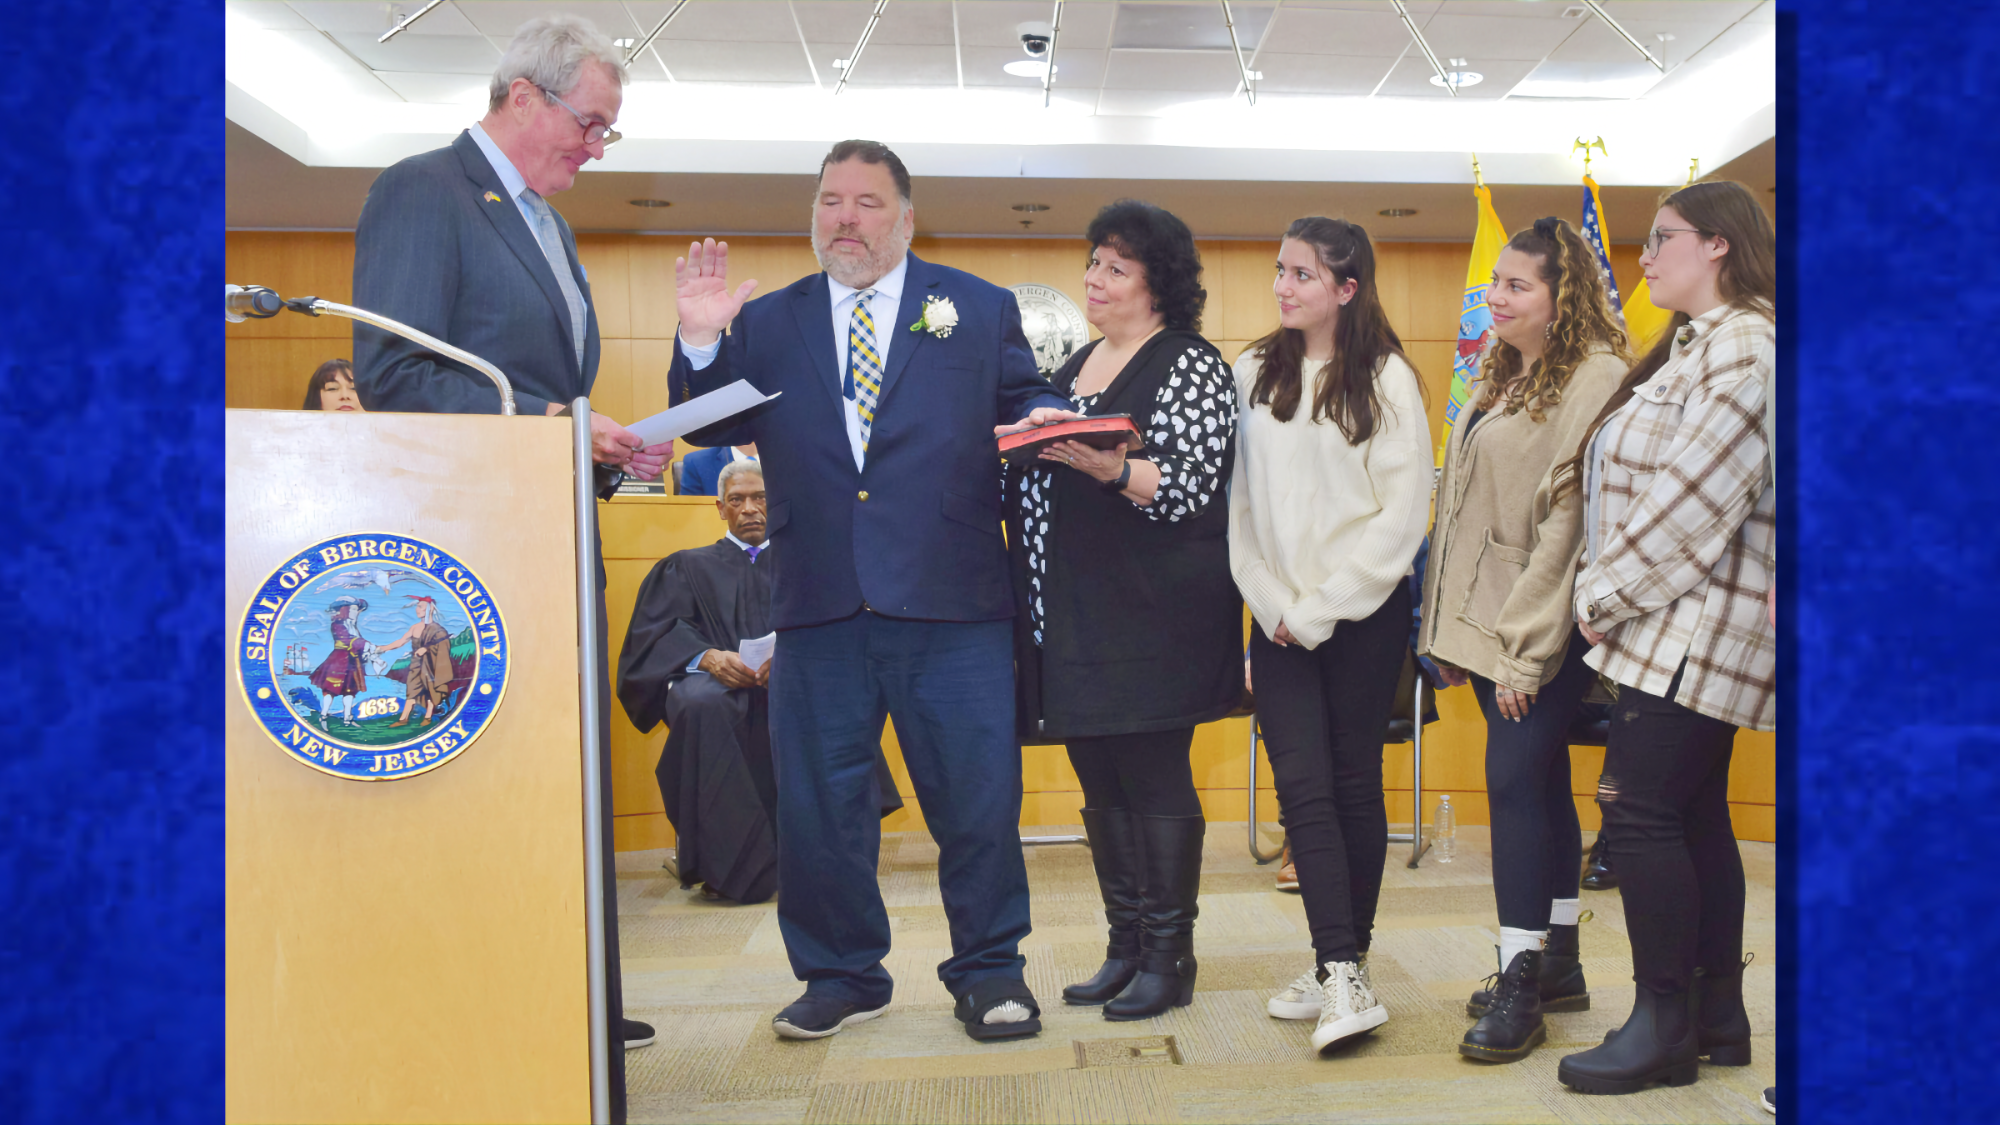 Seal Pack Student - Labor leader Sullivan, of Montvale, elected to chair Bergen County Board of  Commissioners â€” Pascack Press & Northern Valley Press